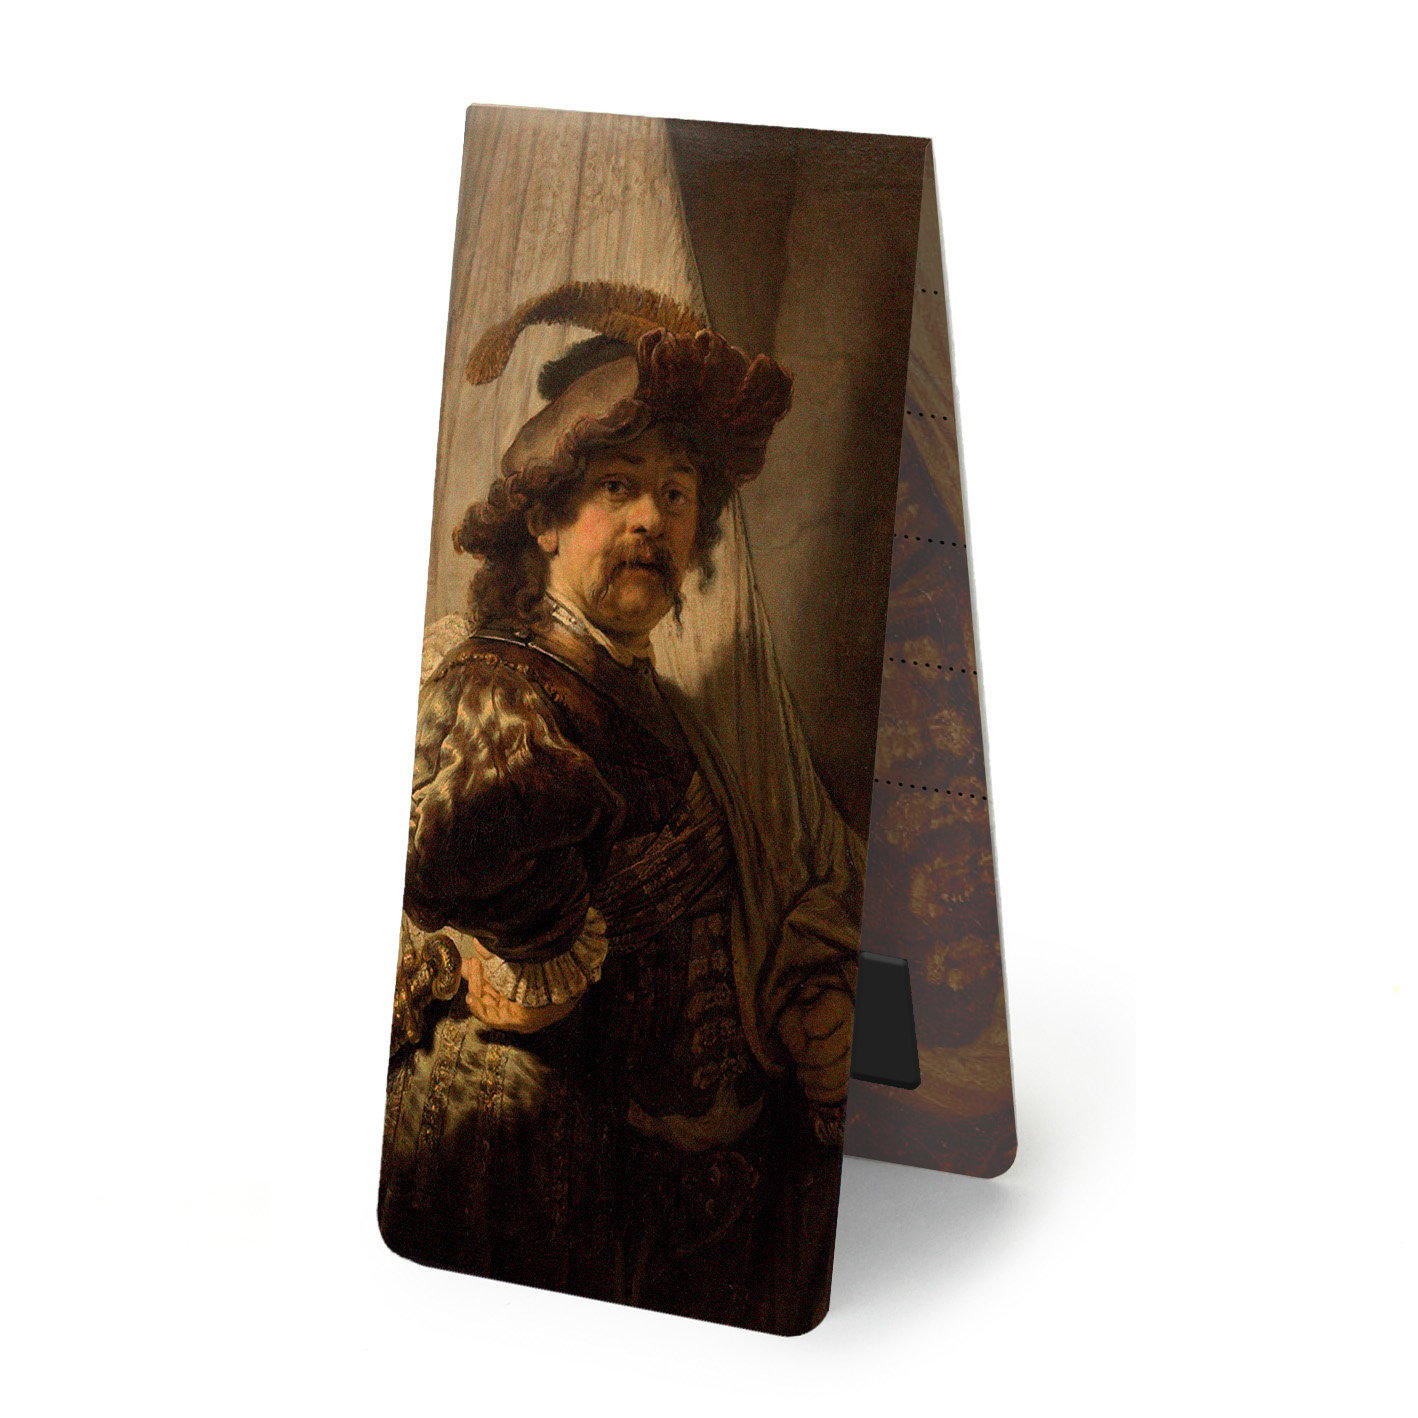 Rembrandt's painting The Banner Bearer is touring the Netherlands